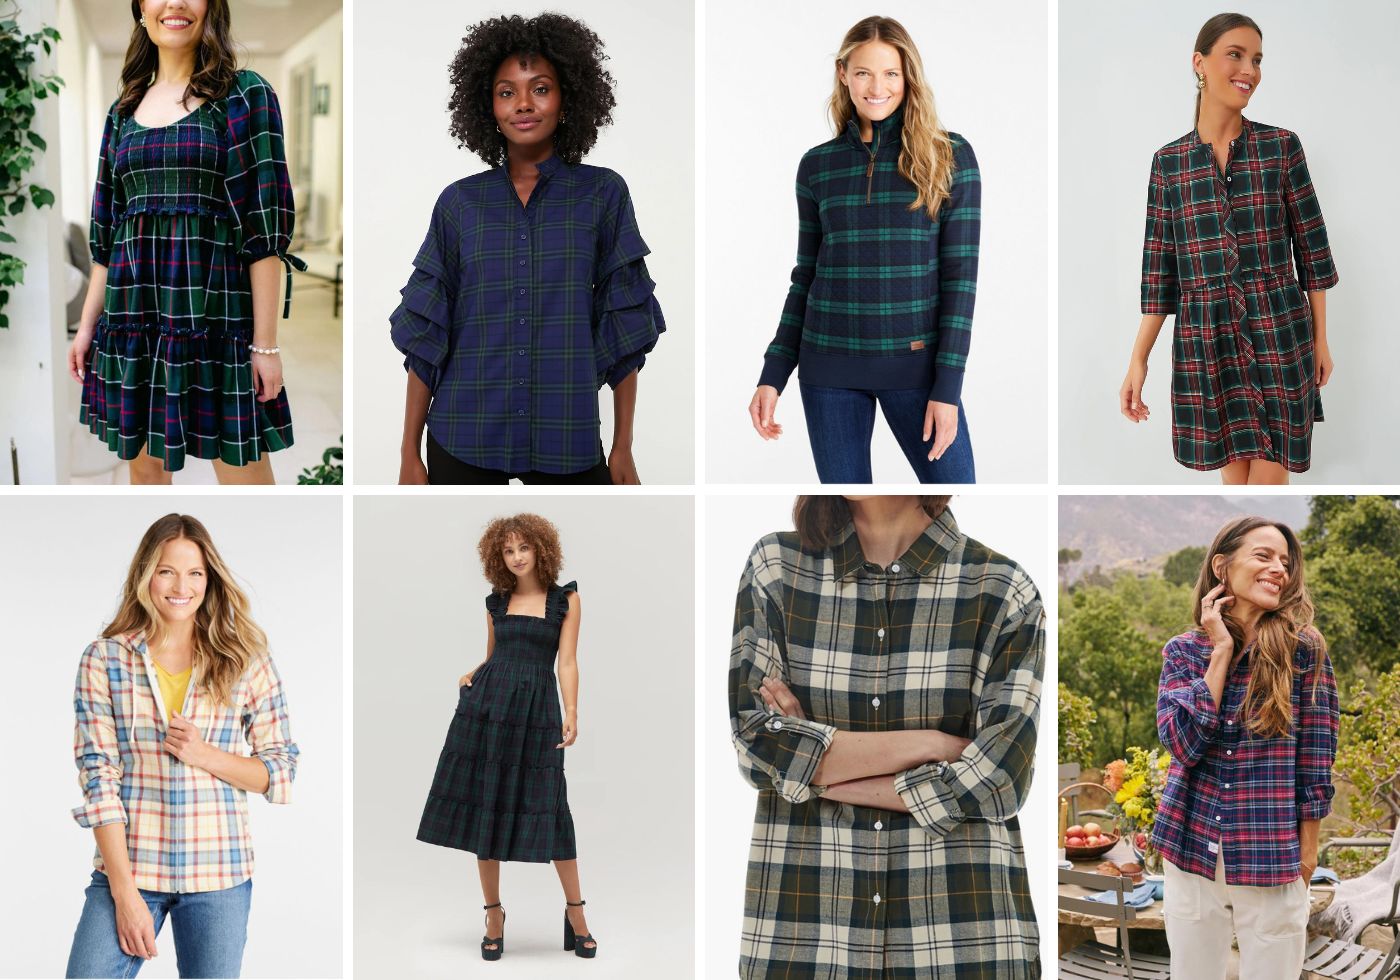 Women's Tartan Plaid Style Finds - Plaid Styles for Her